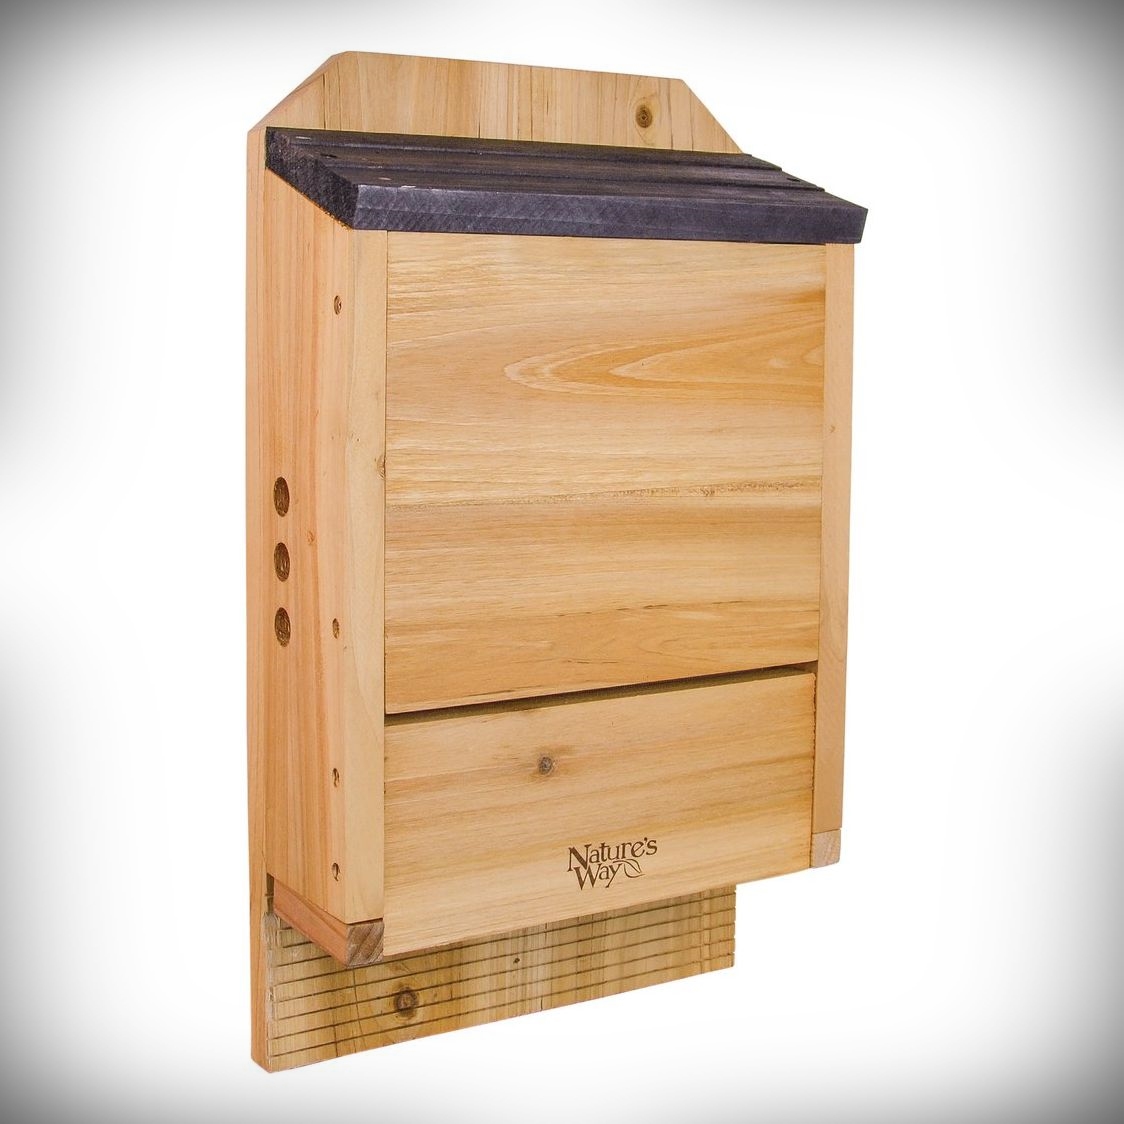 Cedar Bat House 3/4" THICK White Cedar Mosquito Control With FREE SHIPPING! 